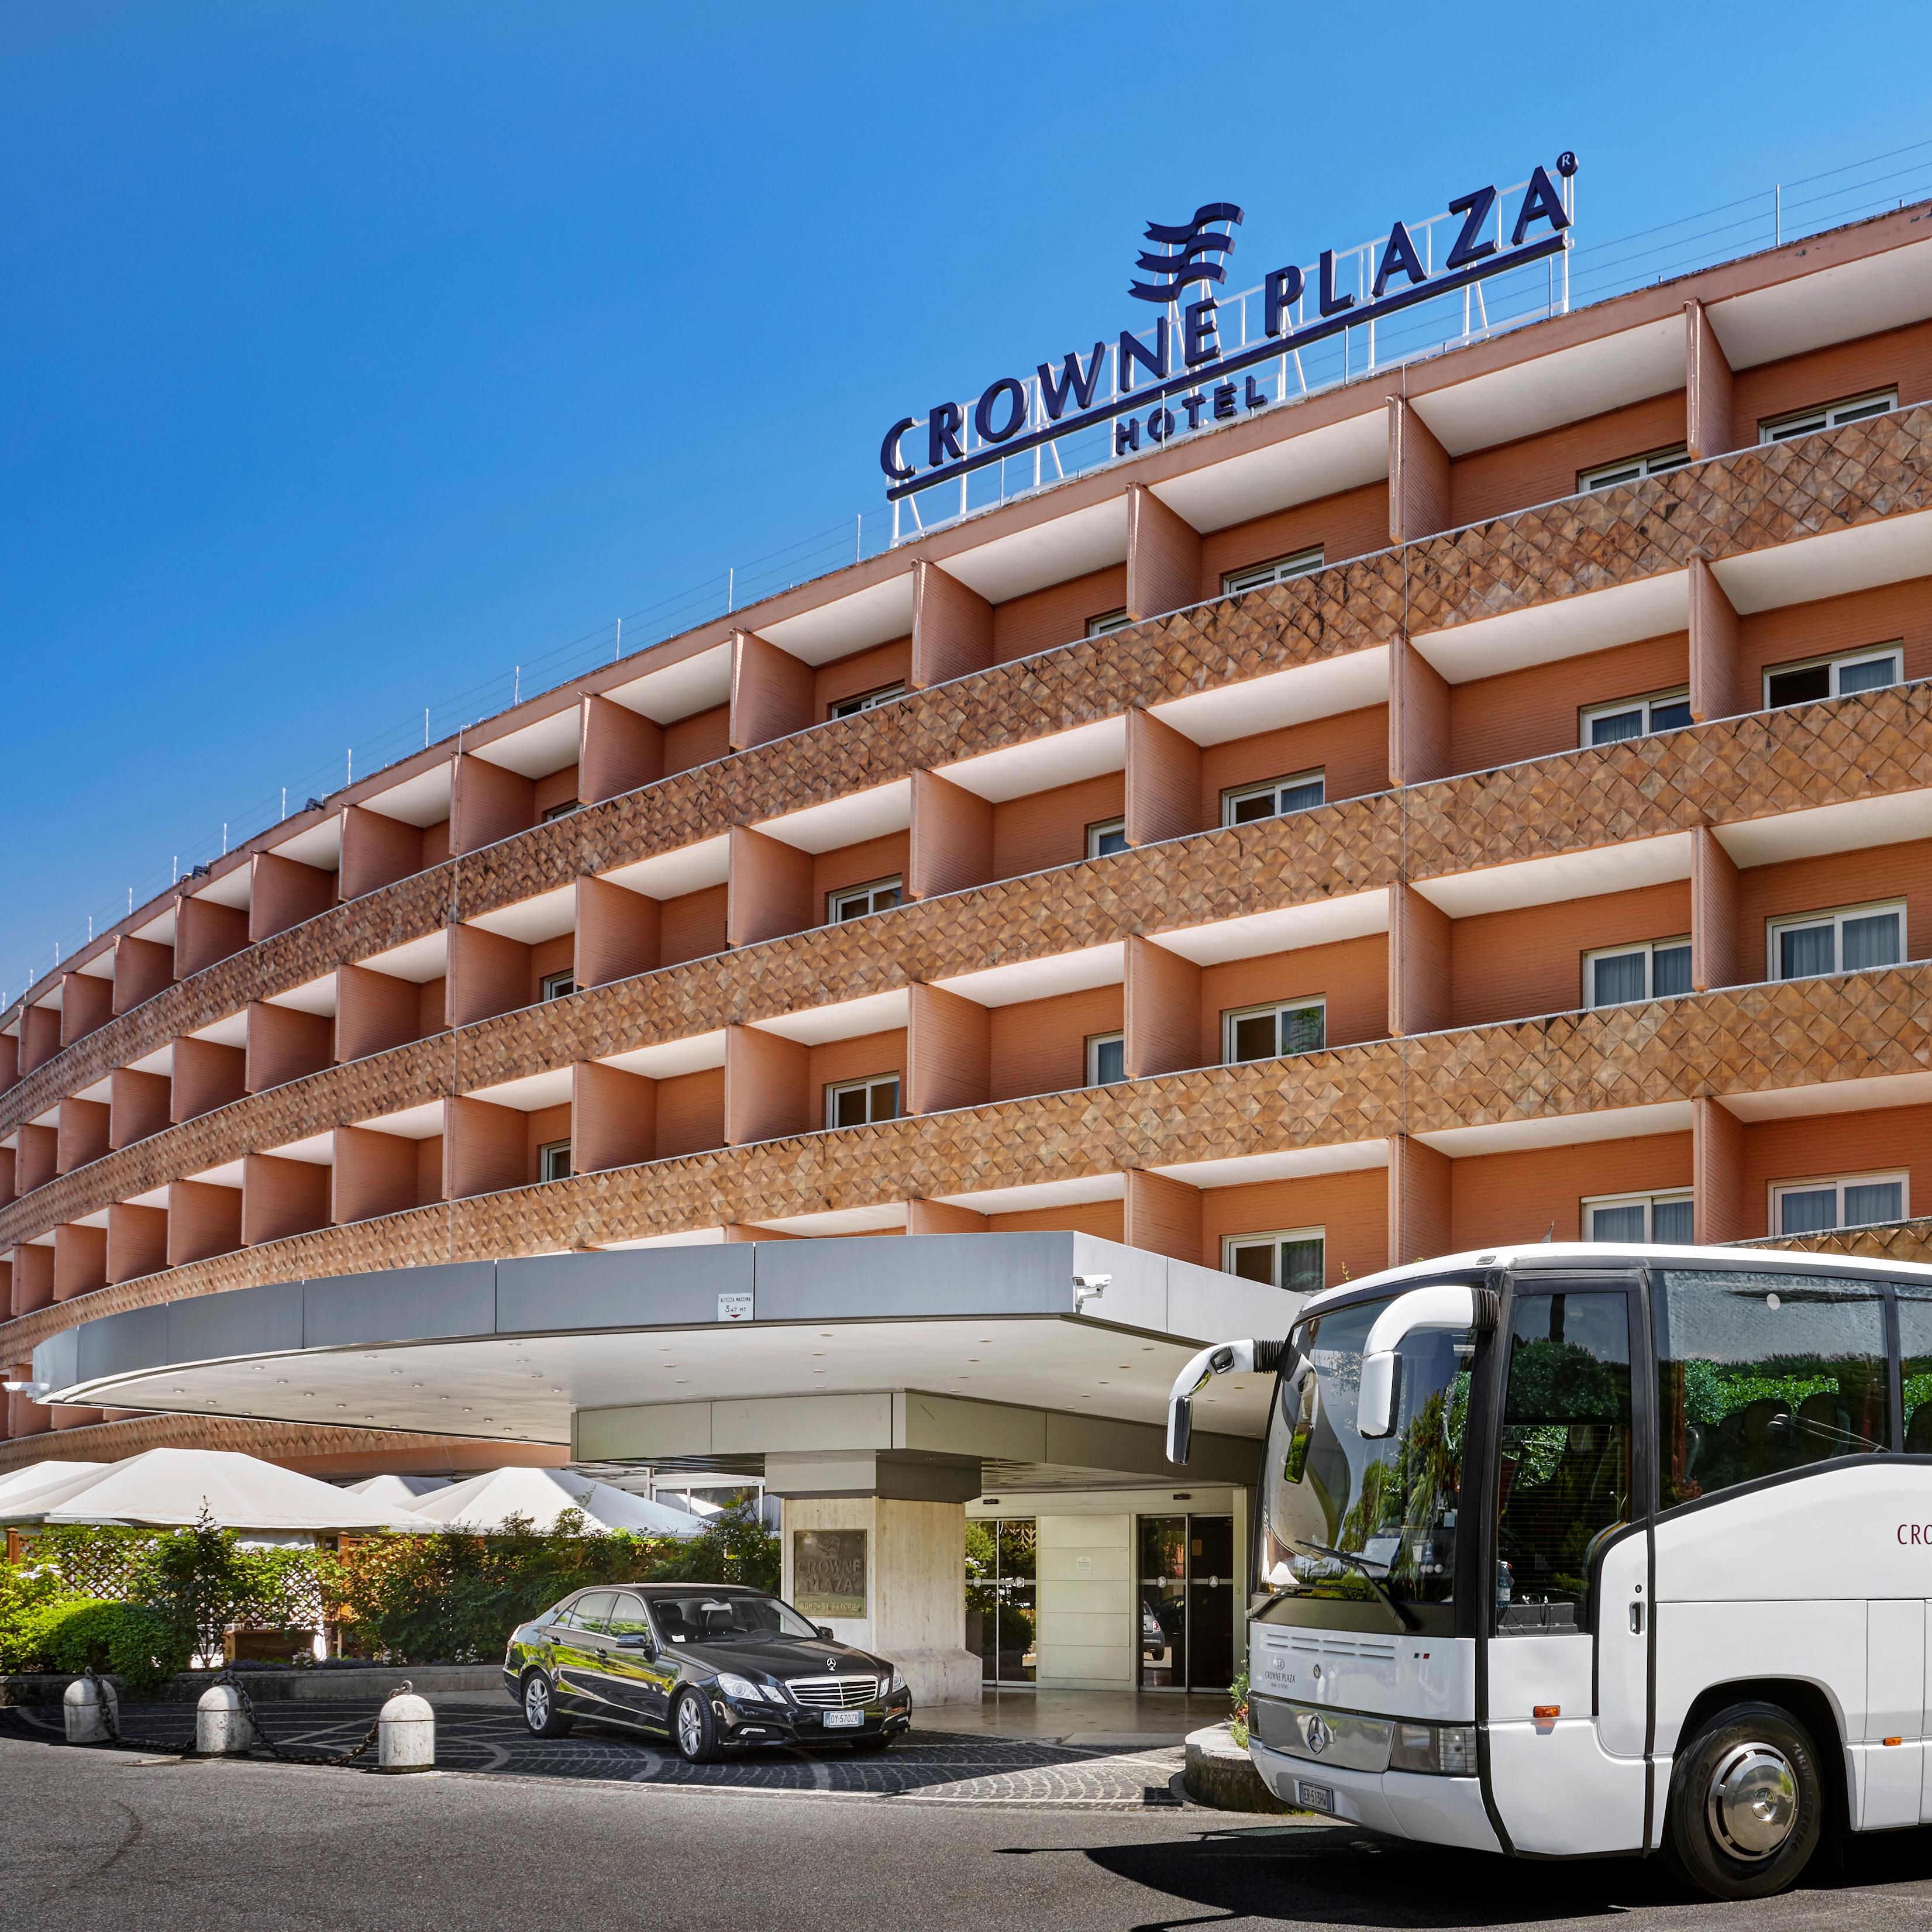 Scheduled shuttle bus to/from airport and city centre at a charge